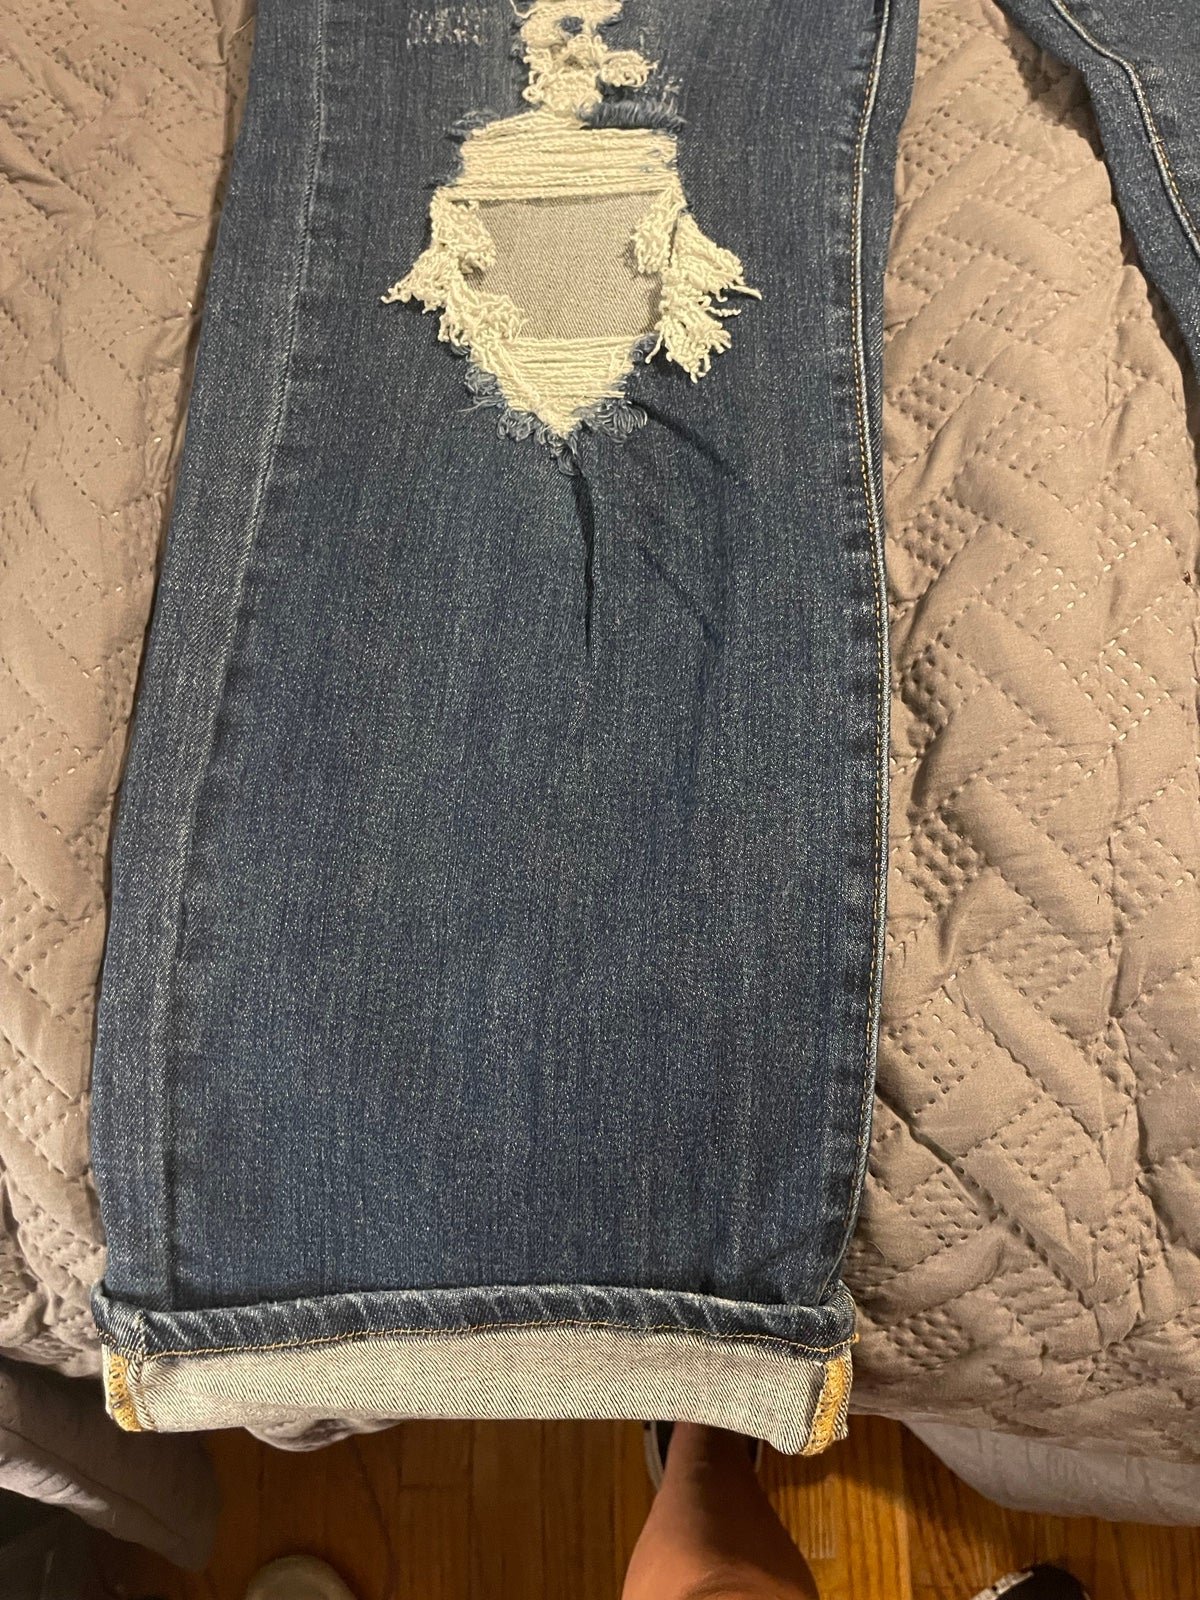 Fashion jeans OeYtF3RRy Low Price